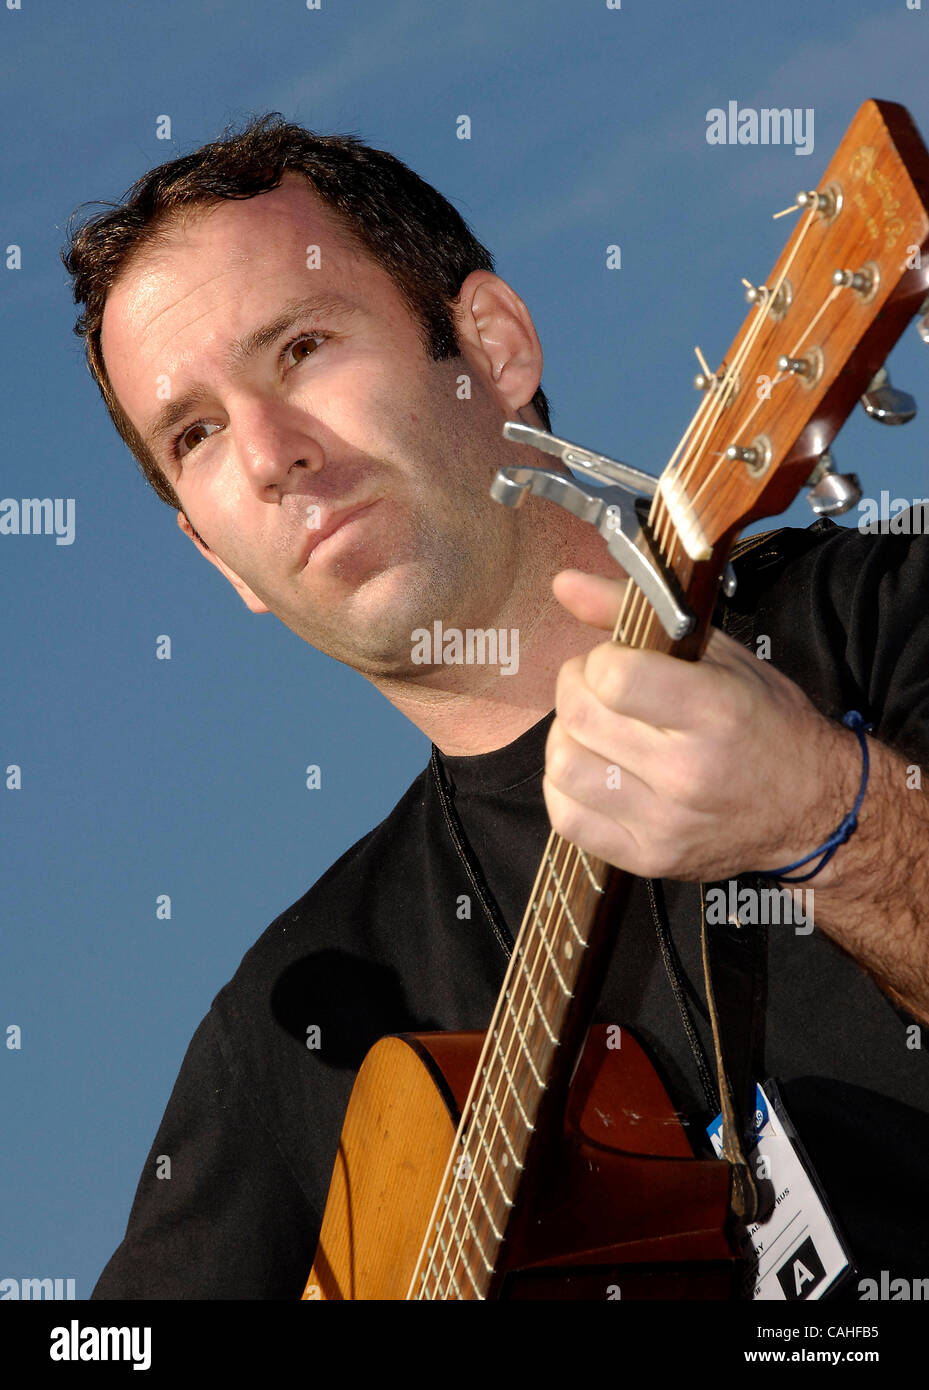 Download preview image - january-17-2008-anaheim-ca-usa-musician-paul-lemire-performing-during-CAHFB5